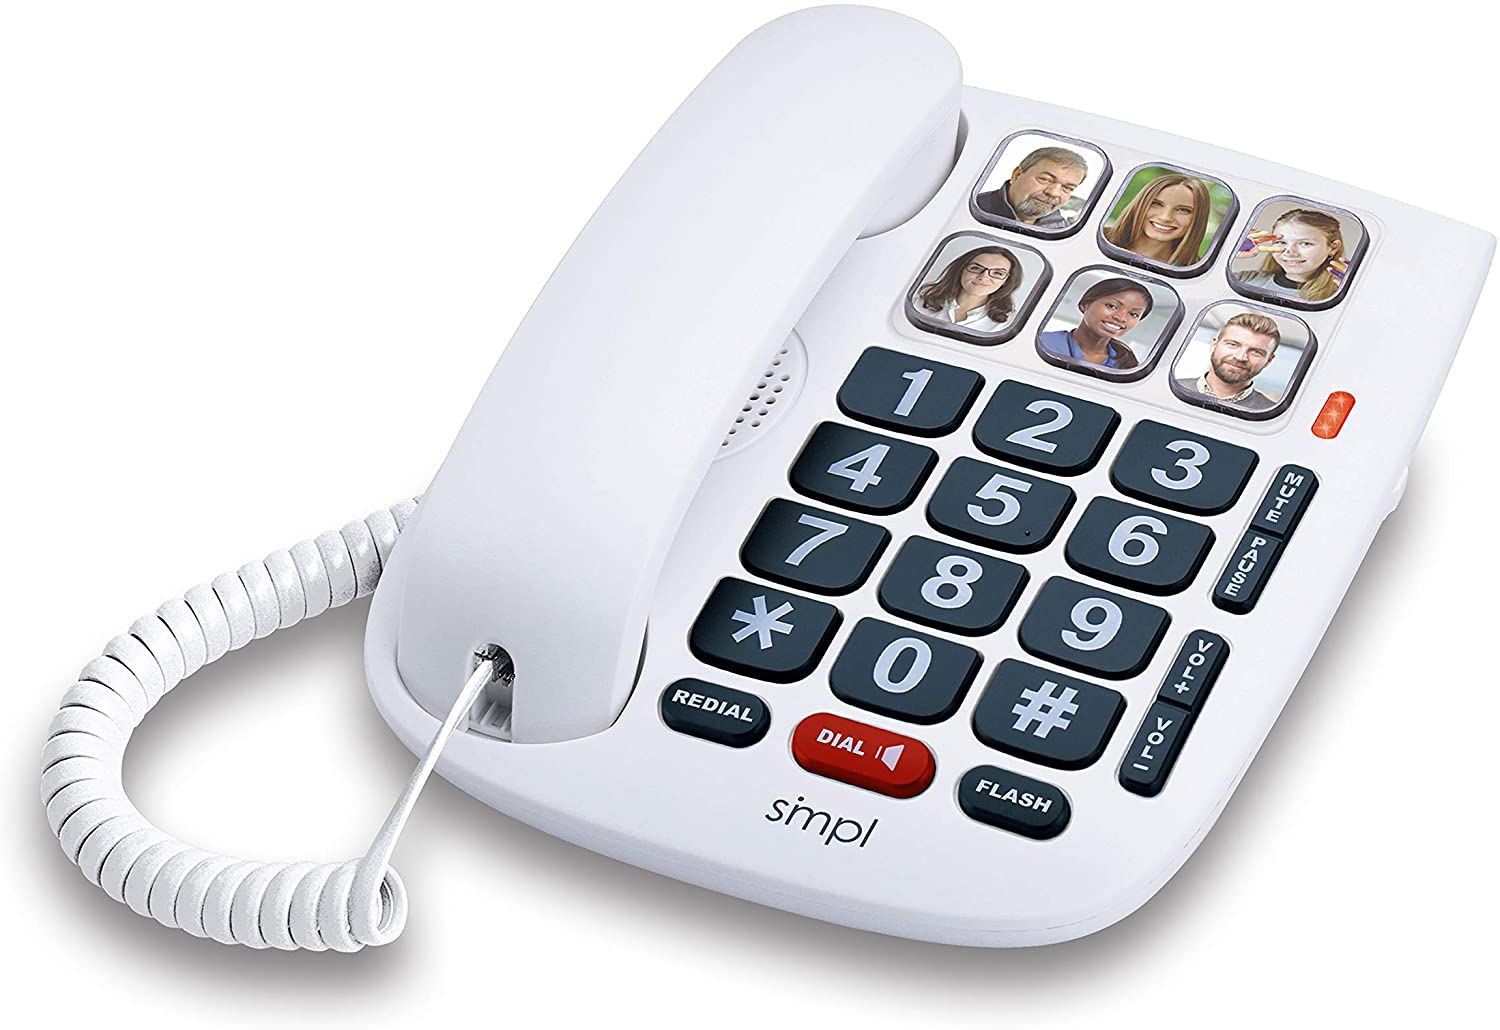 Best Cordless Phones For Seniors With Dementia | SMPL Hands Free Dial Photo Memory Corded Phone